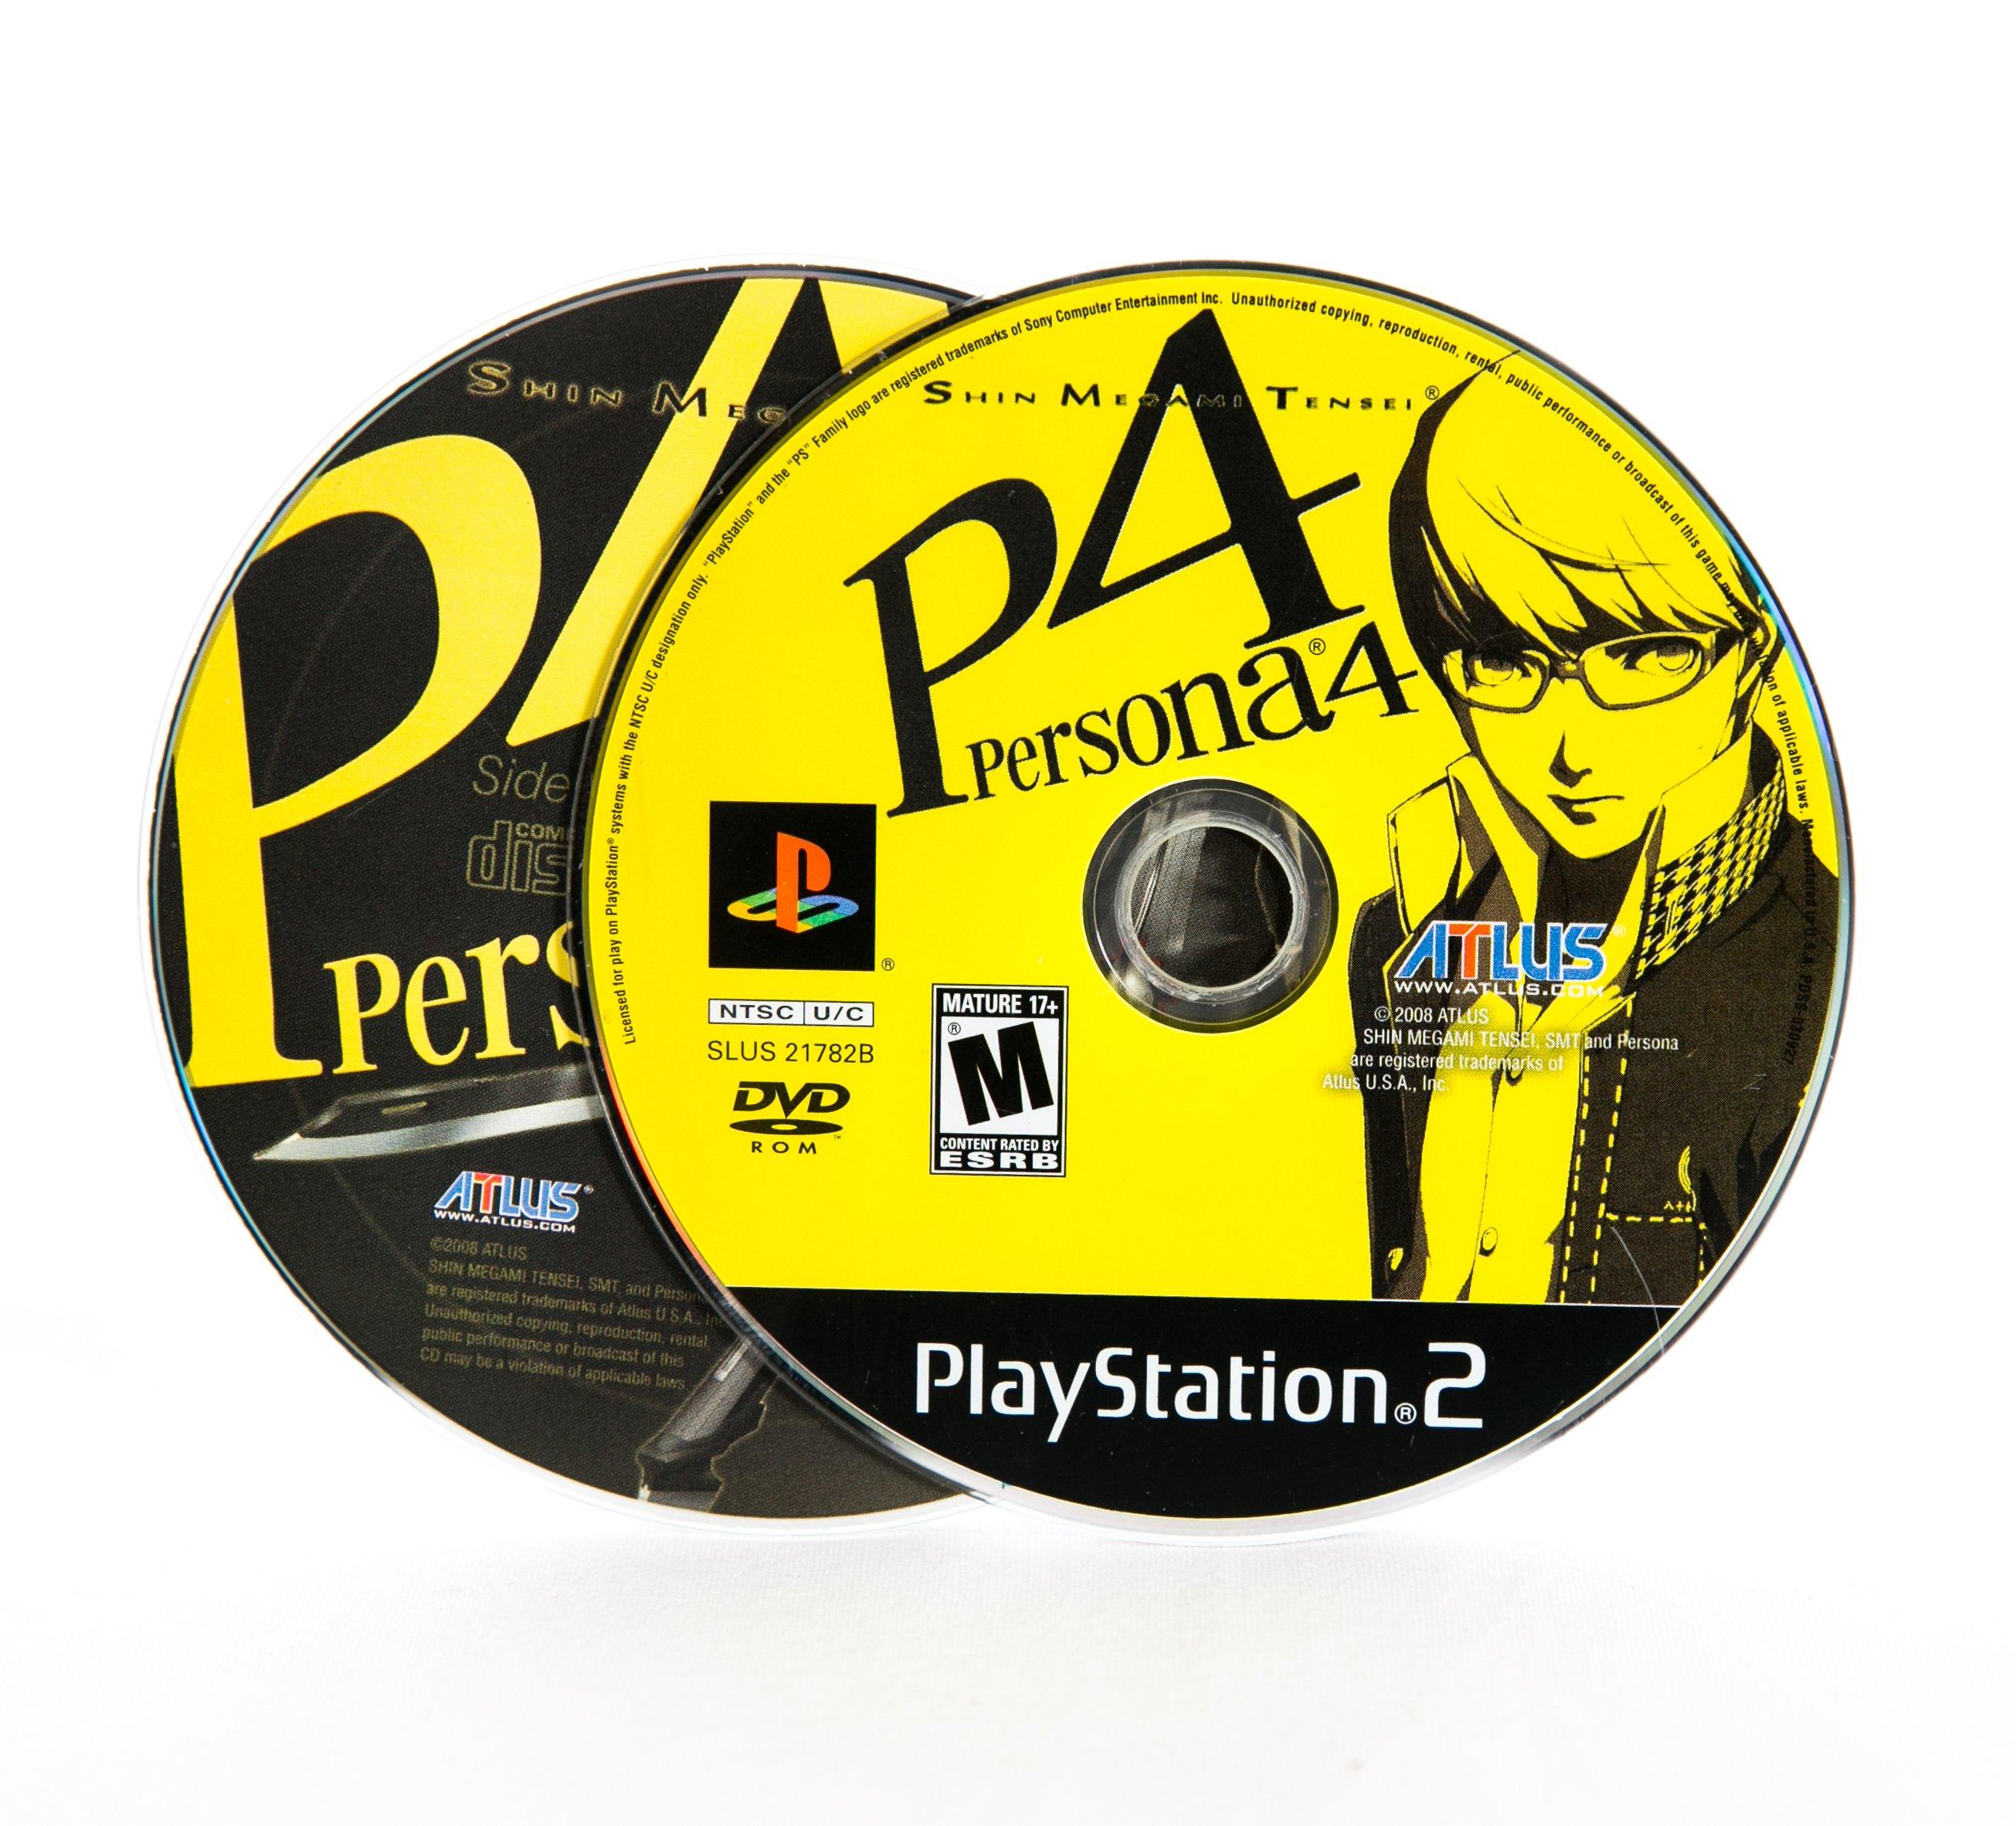 can i play persona 4 on ps3